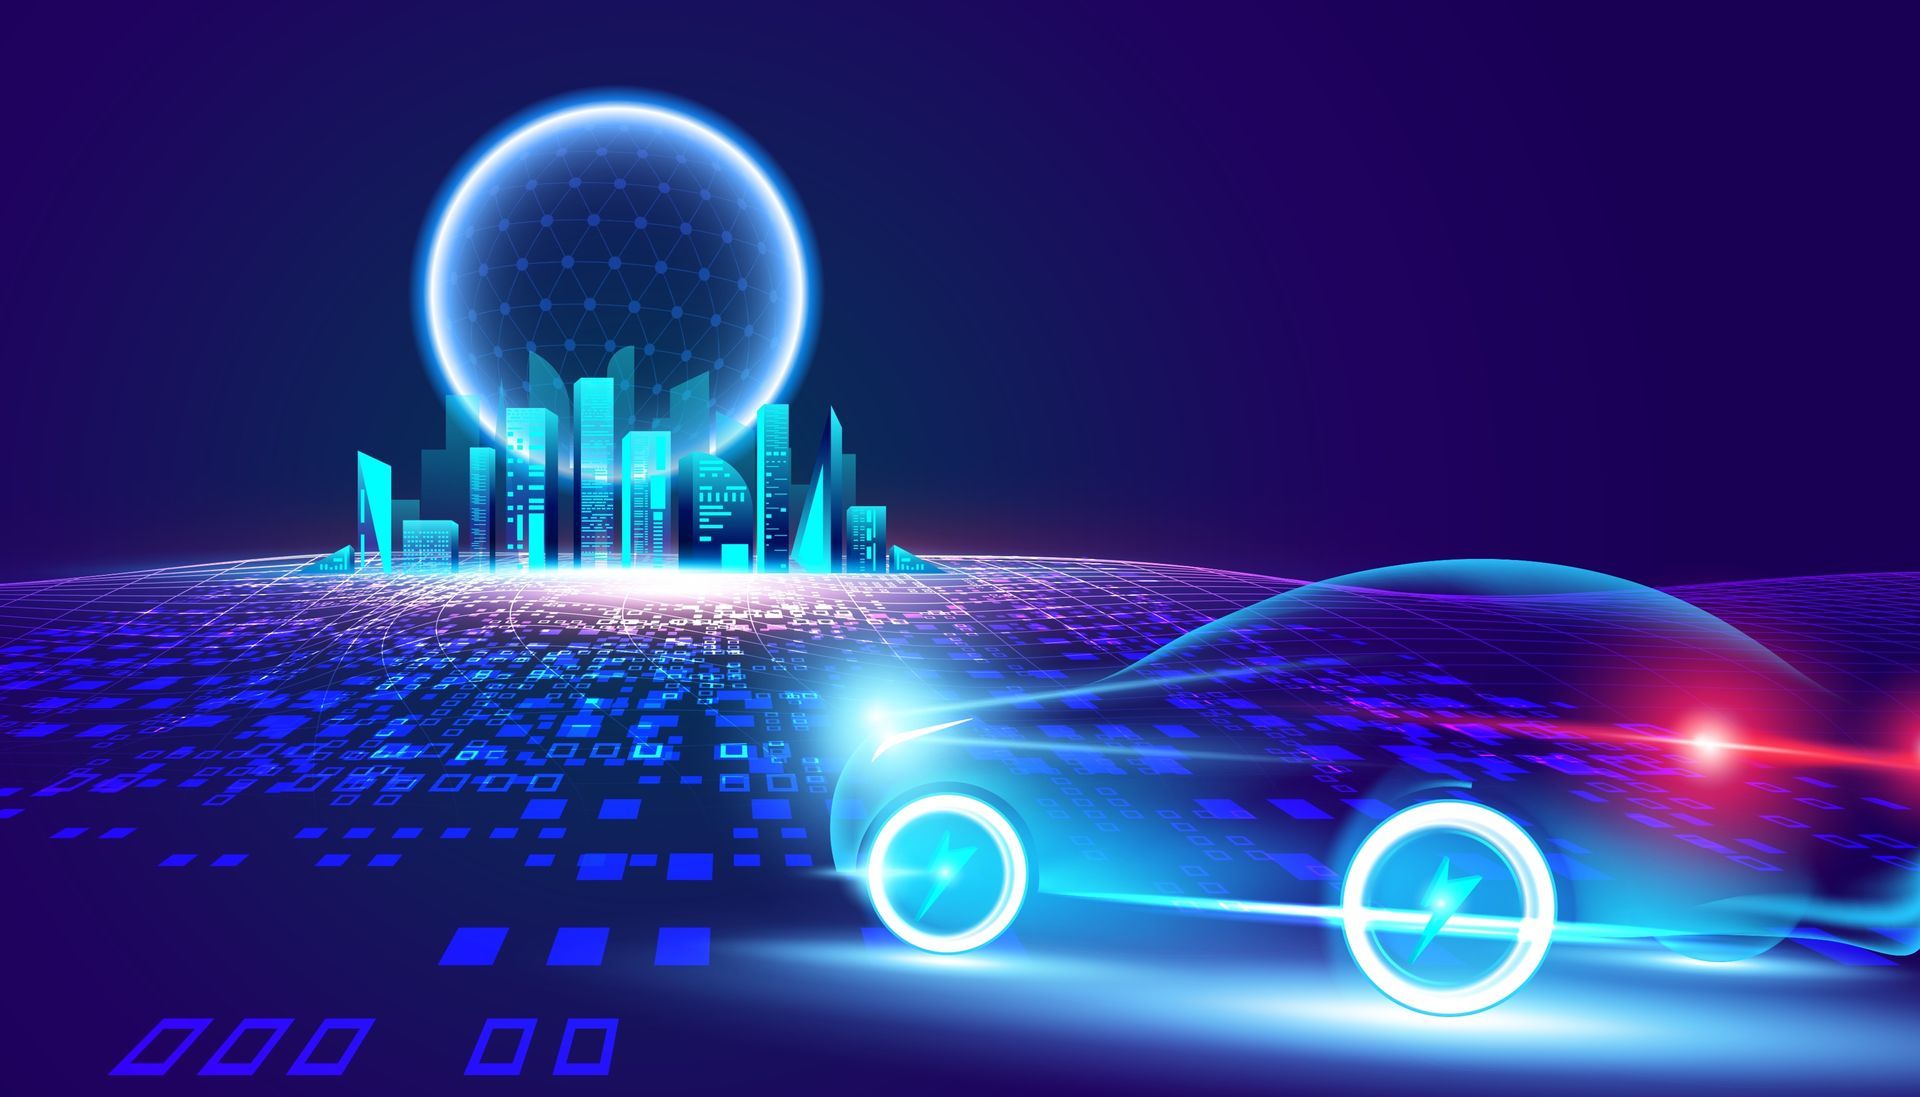 Here’s how the metaverse could transform the auto industry.